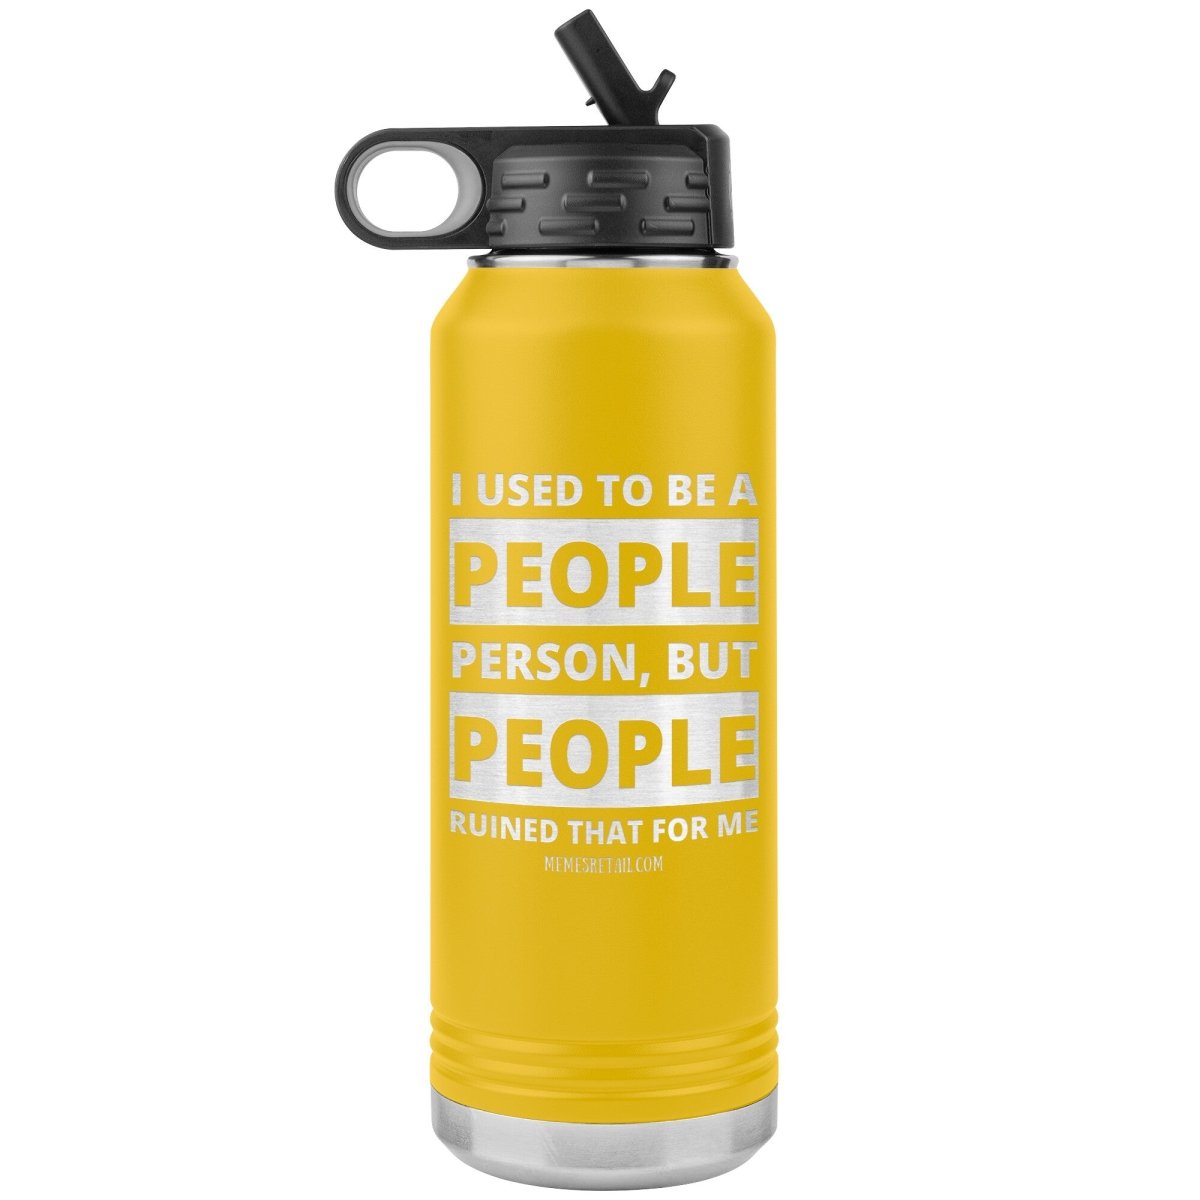 I Used To Be A People Person, But People Ruined That For Me 32 oz Water Tumbler, Yellow - MemesRetail.com